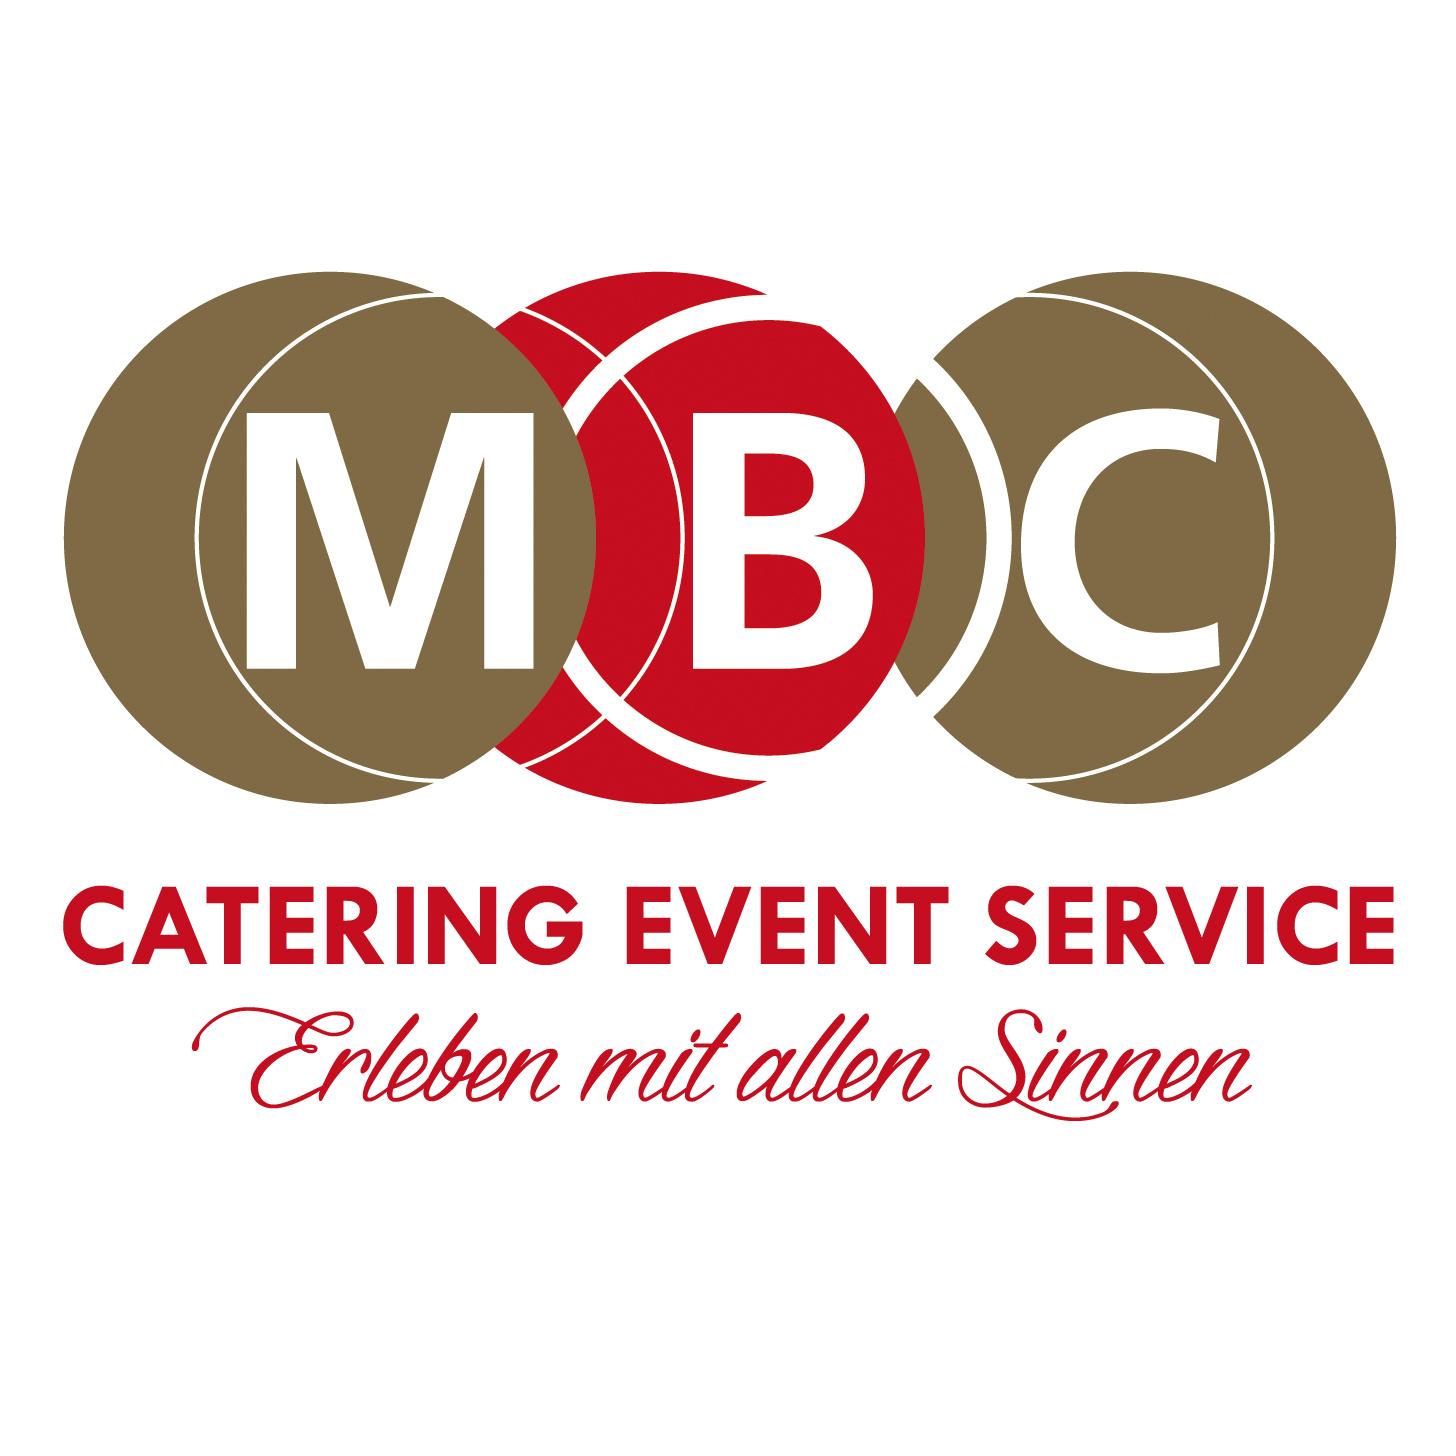 MBC Catering Event Service